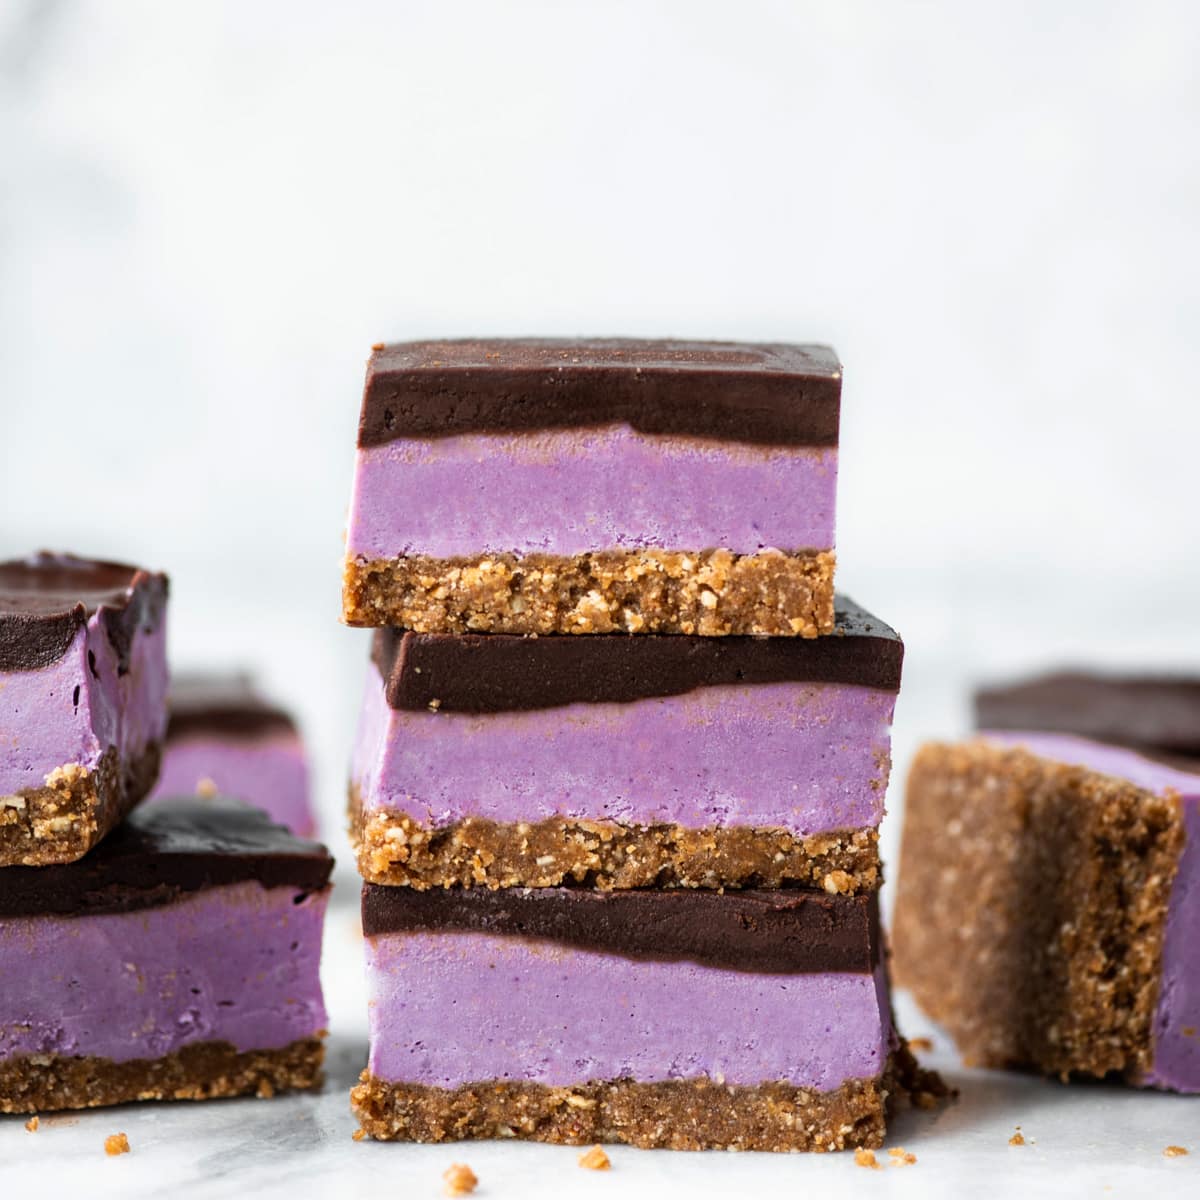 As Strange as It Sounds, We’ll Determine What Marvel Character You Are Simply by the Food You Choose Purple sweet potato cheesecake